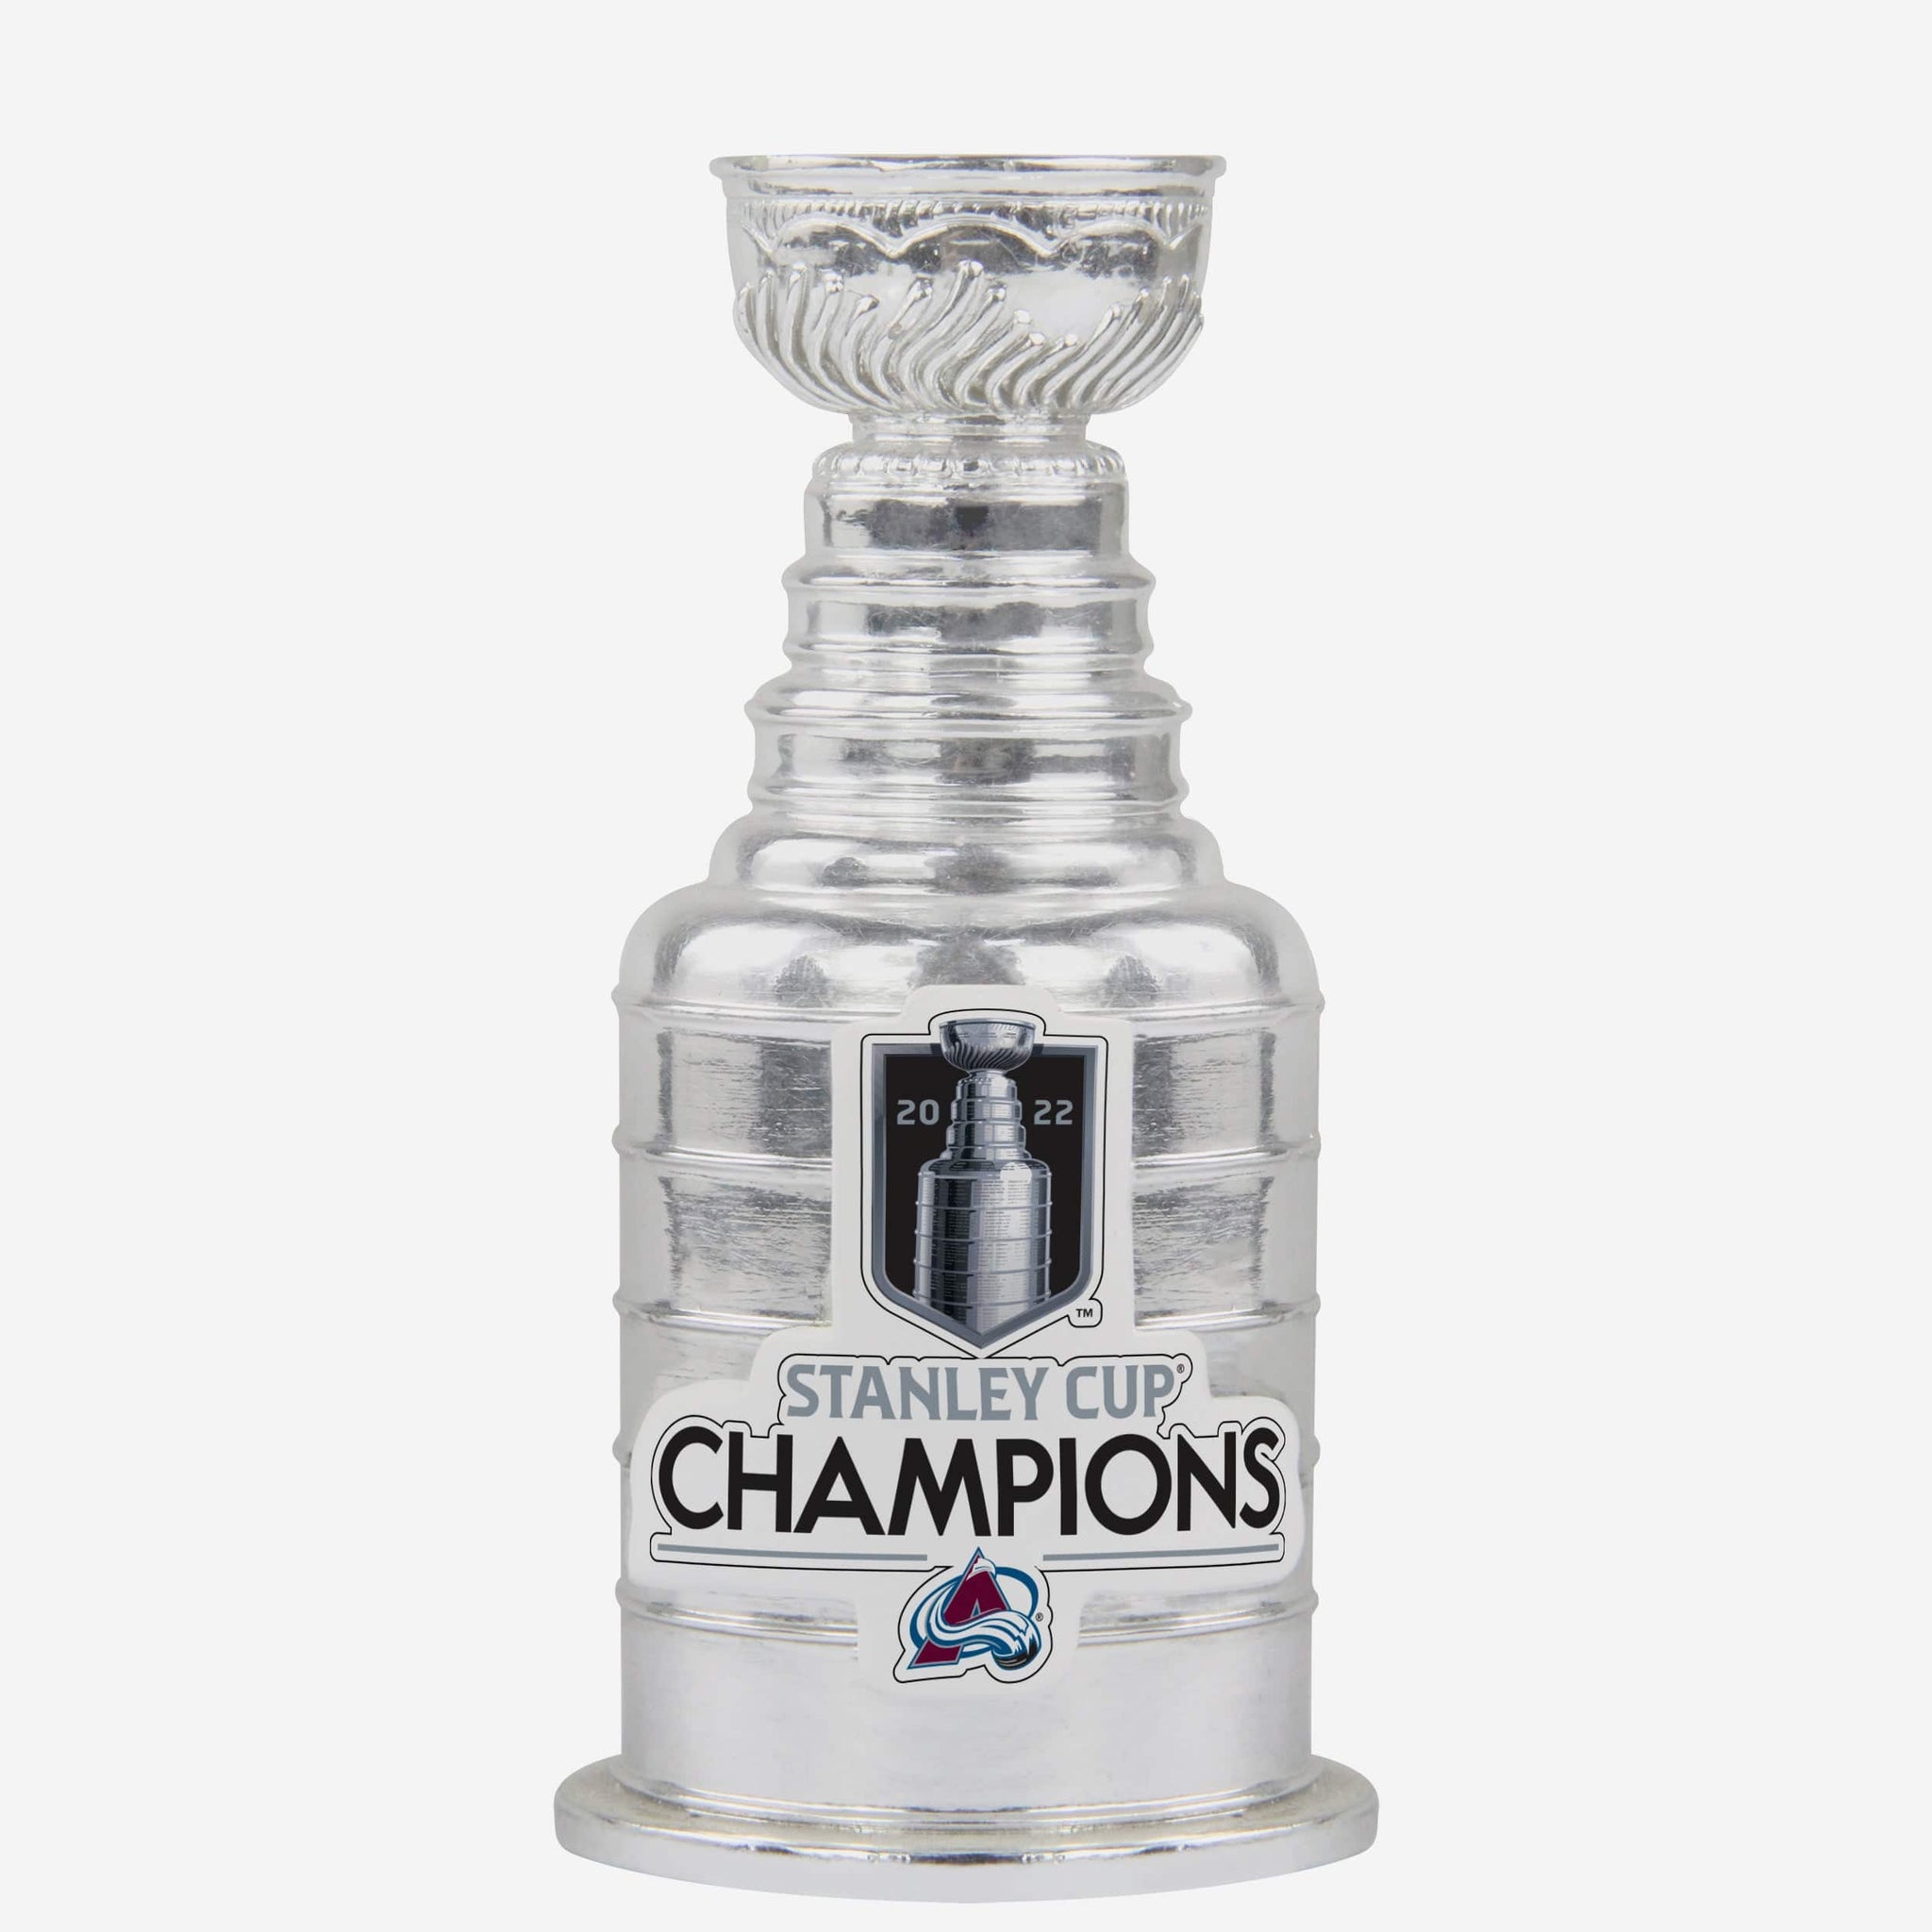 BLUE Lightning Stanley Cup Champions Baby 1 Piece